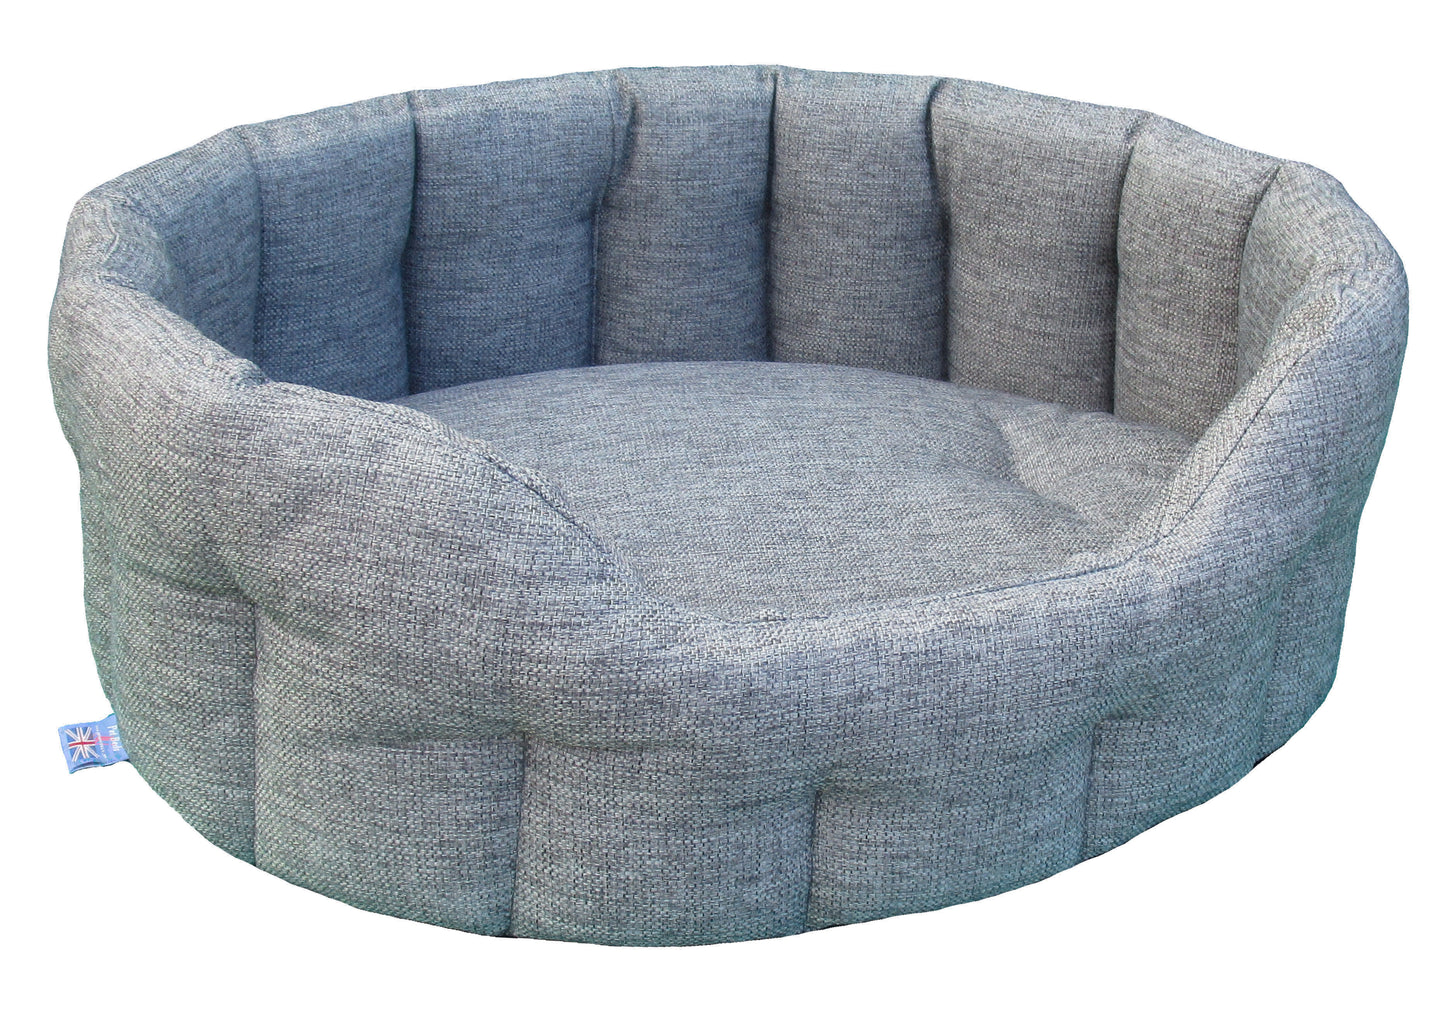 P&L Premium Oval Drop Fronted Heavy Duty Basket Weave Softee Beds